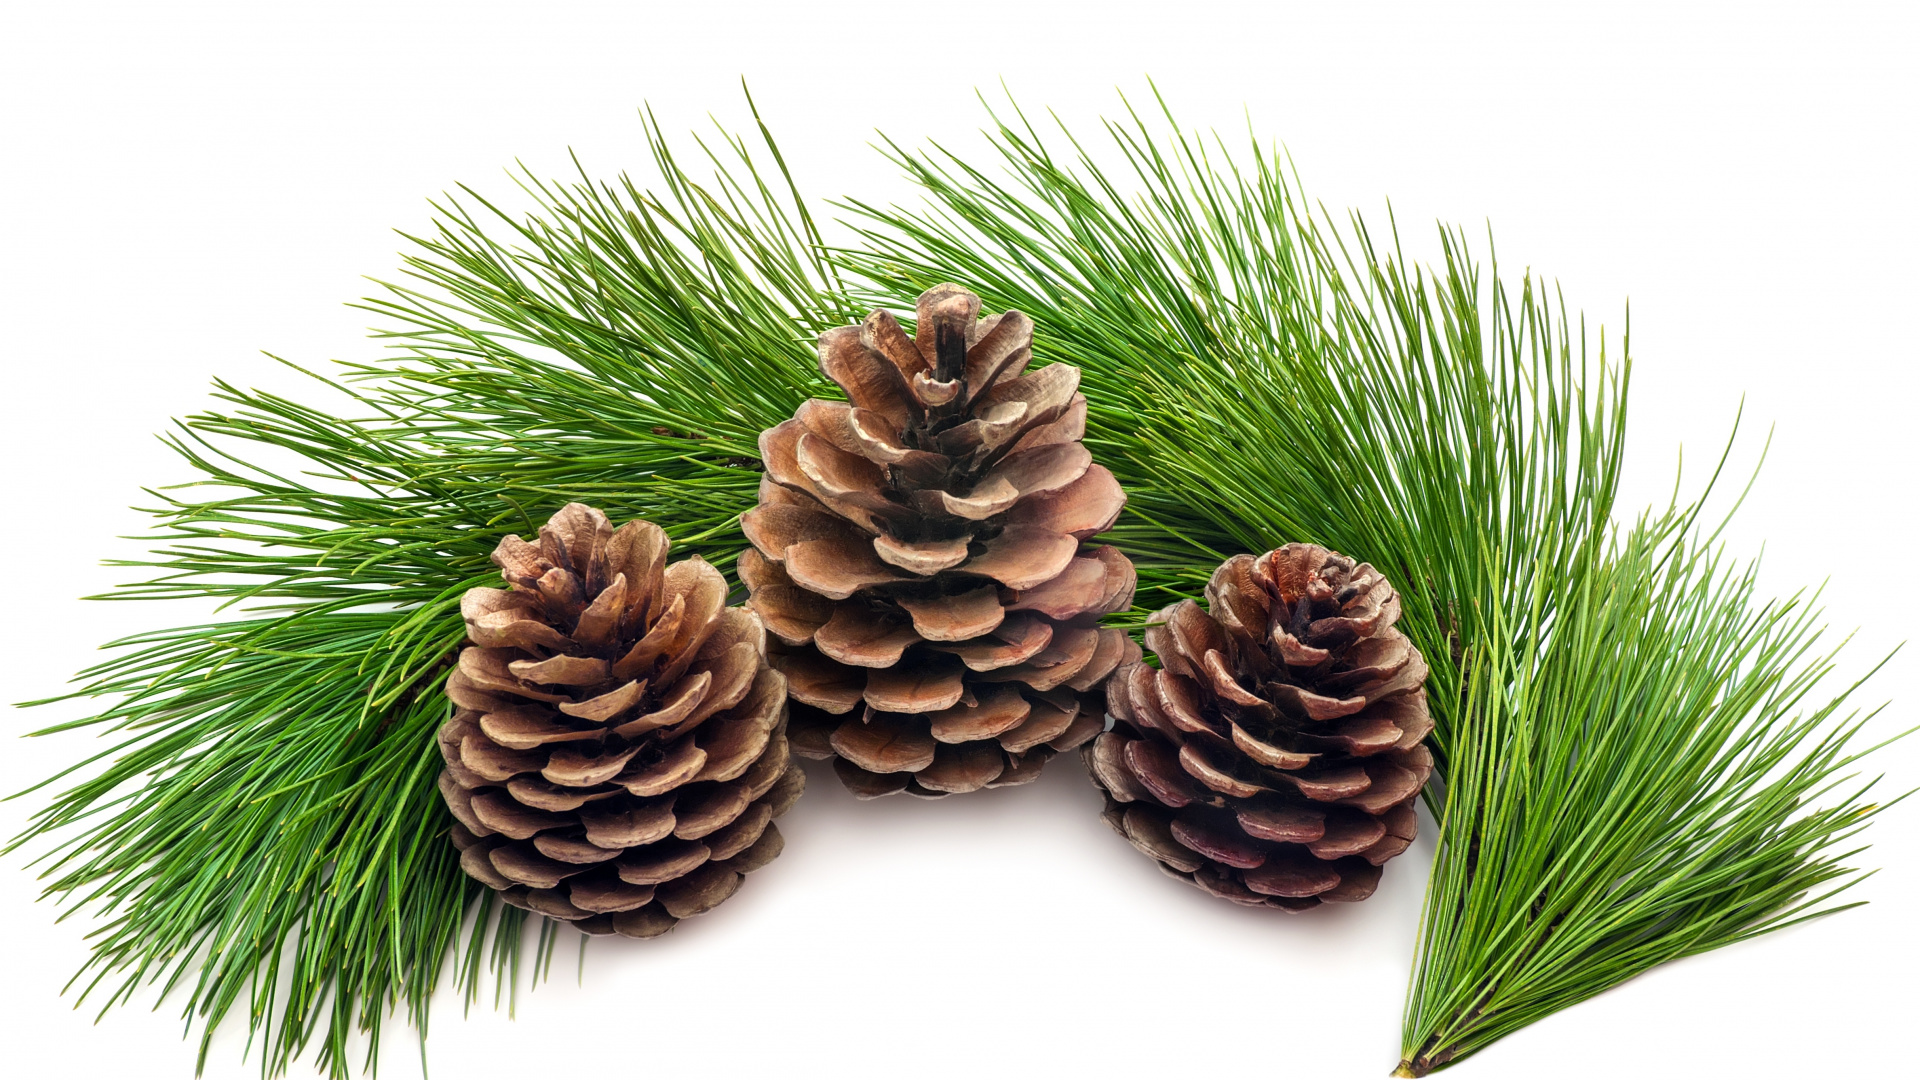 Brown Pine Cone on White Background. Wallpaper in 1920x1080 Resolution